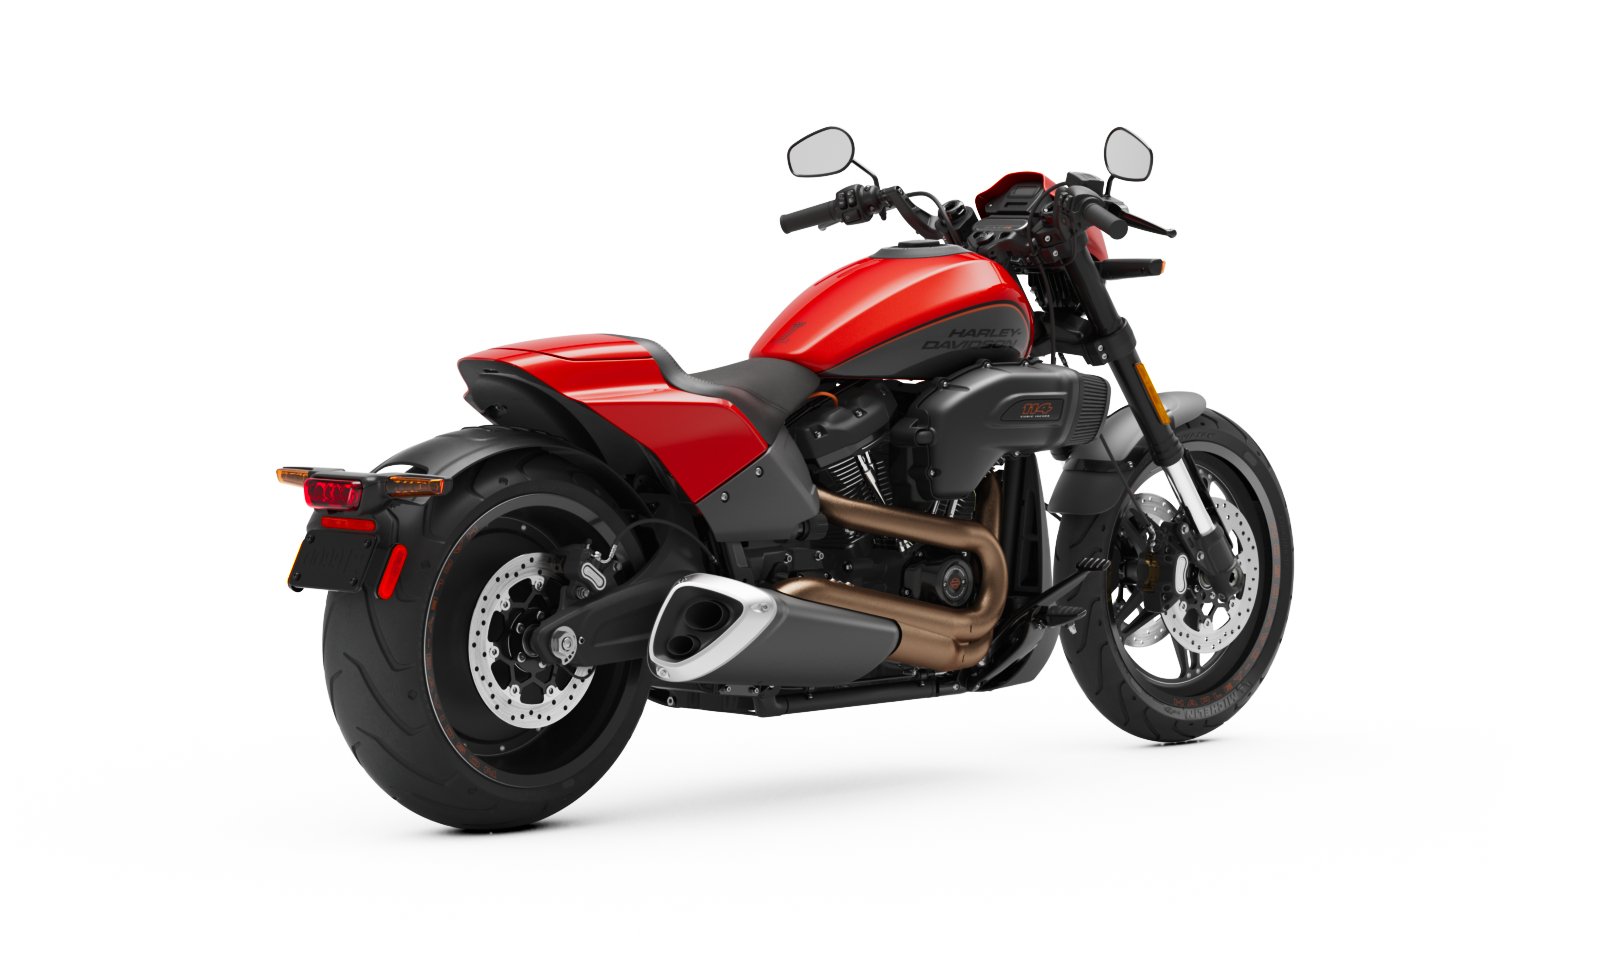 2019 Harley Davidson Fxdr 114 First Look 13 Fast Facts